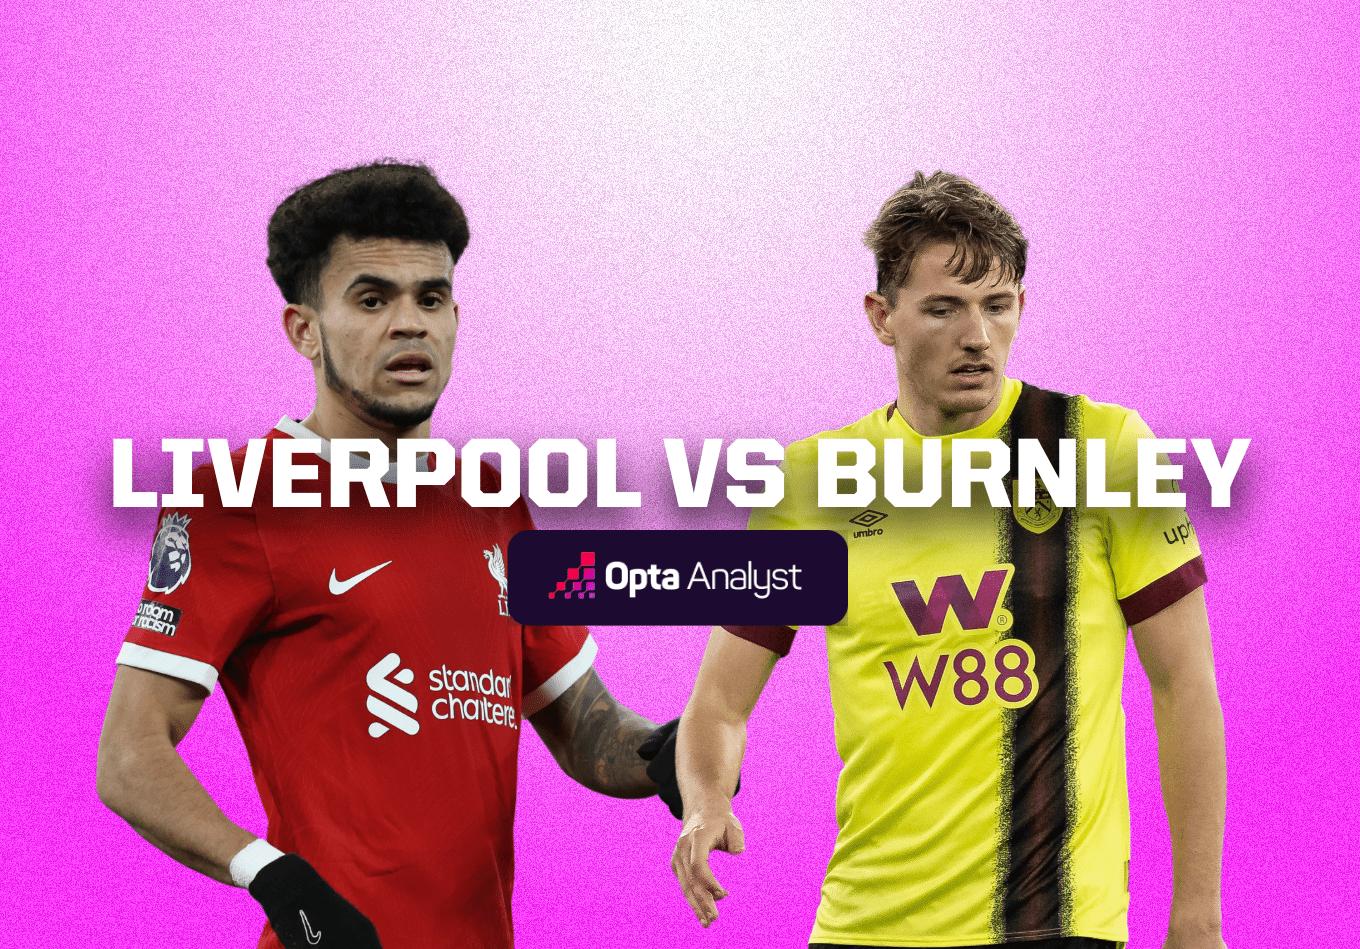 Liverpool vs Burnley: Prediction and Preview